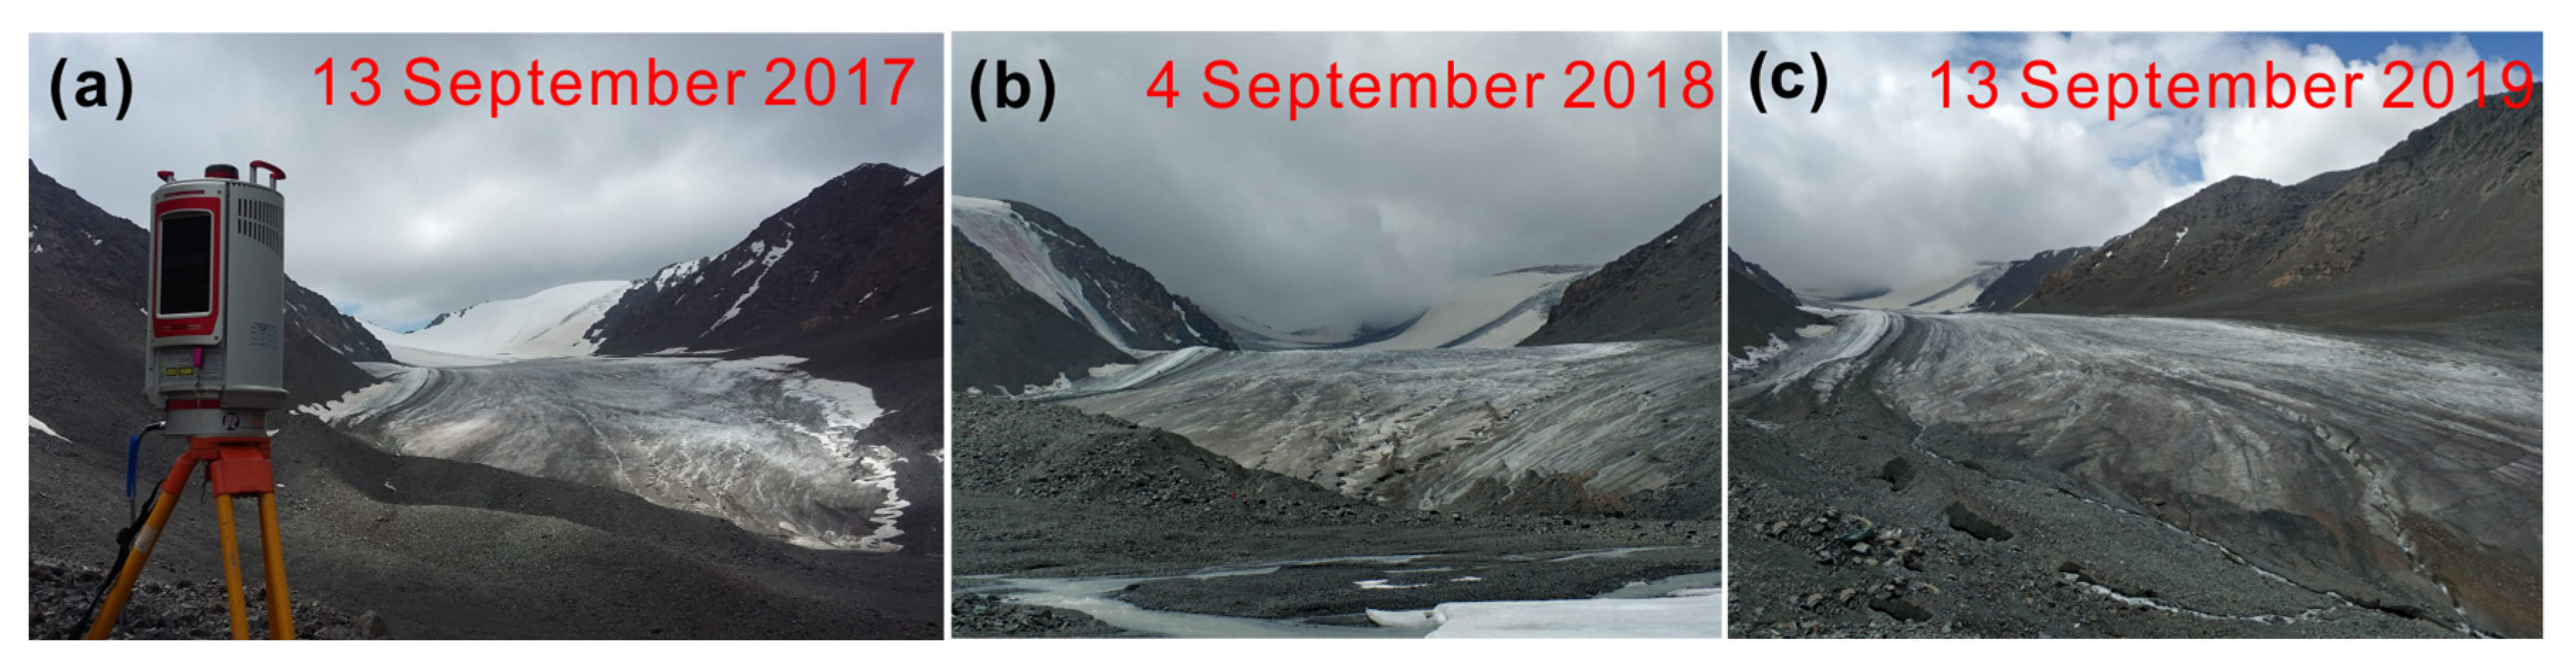 Remote Sensing | Free Full-Text | Spatio-Temporal Changes of Mass Balance  in the Ablation Area of the Muz Taw Glacier, Sawir Mountains, from  Multi-Temporal Terrestrial Geodetic Surveys | HTML